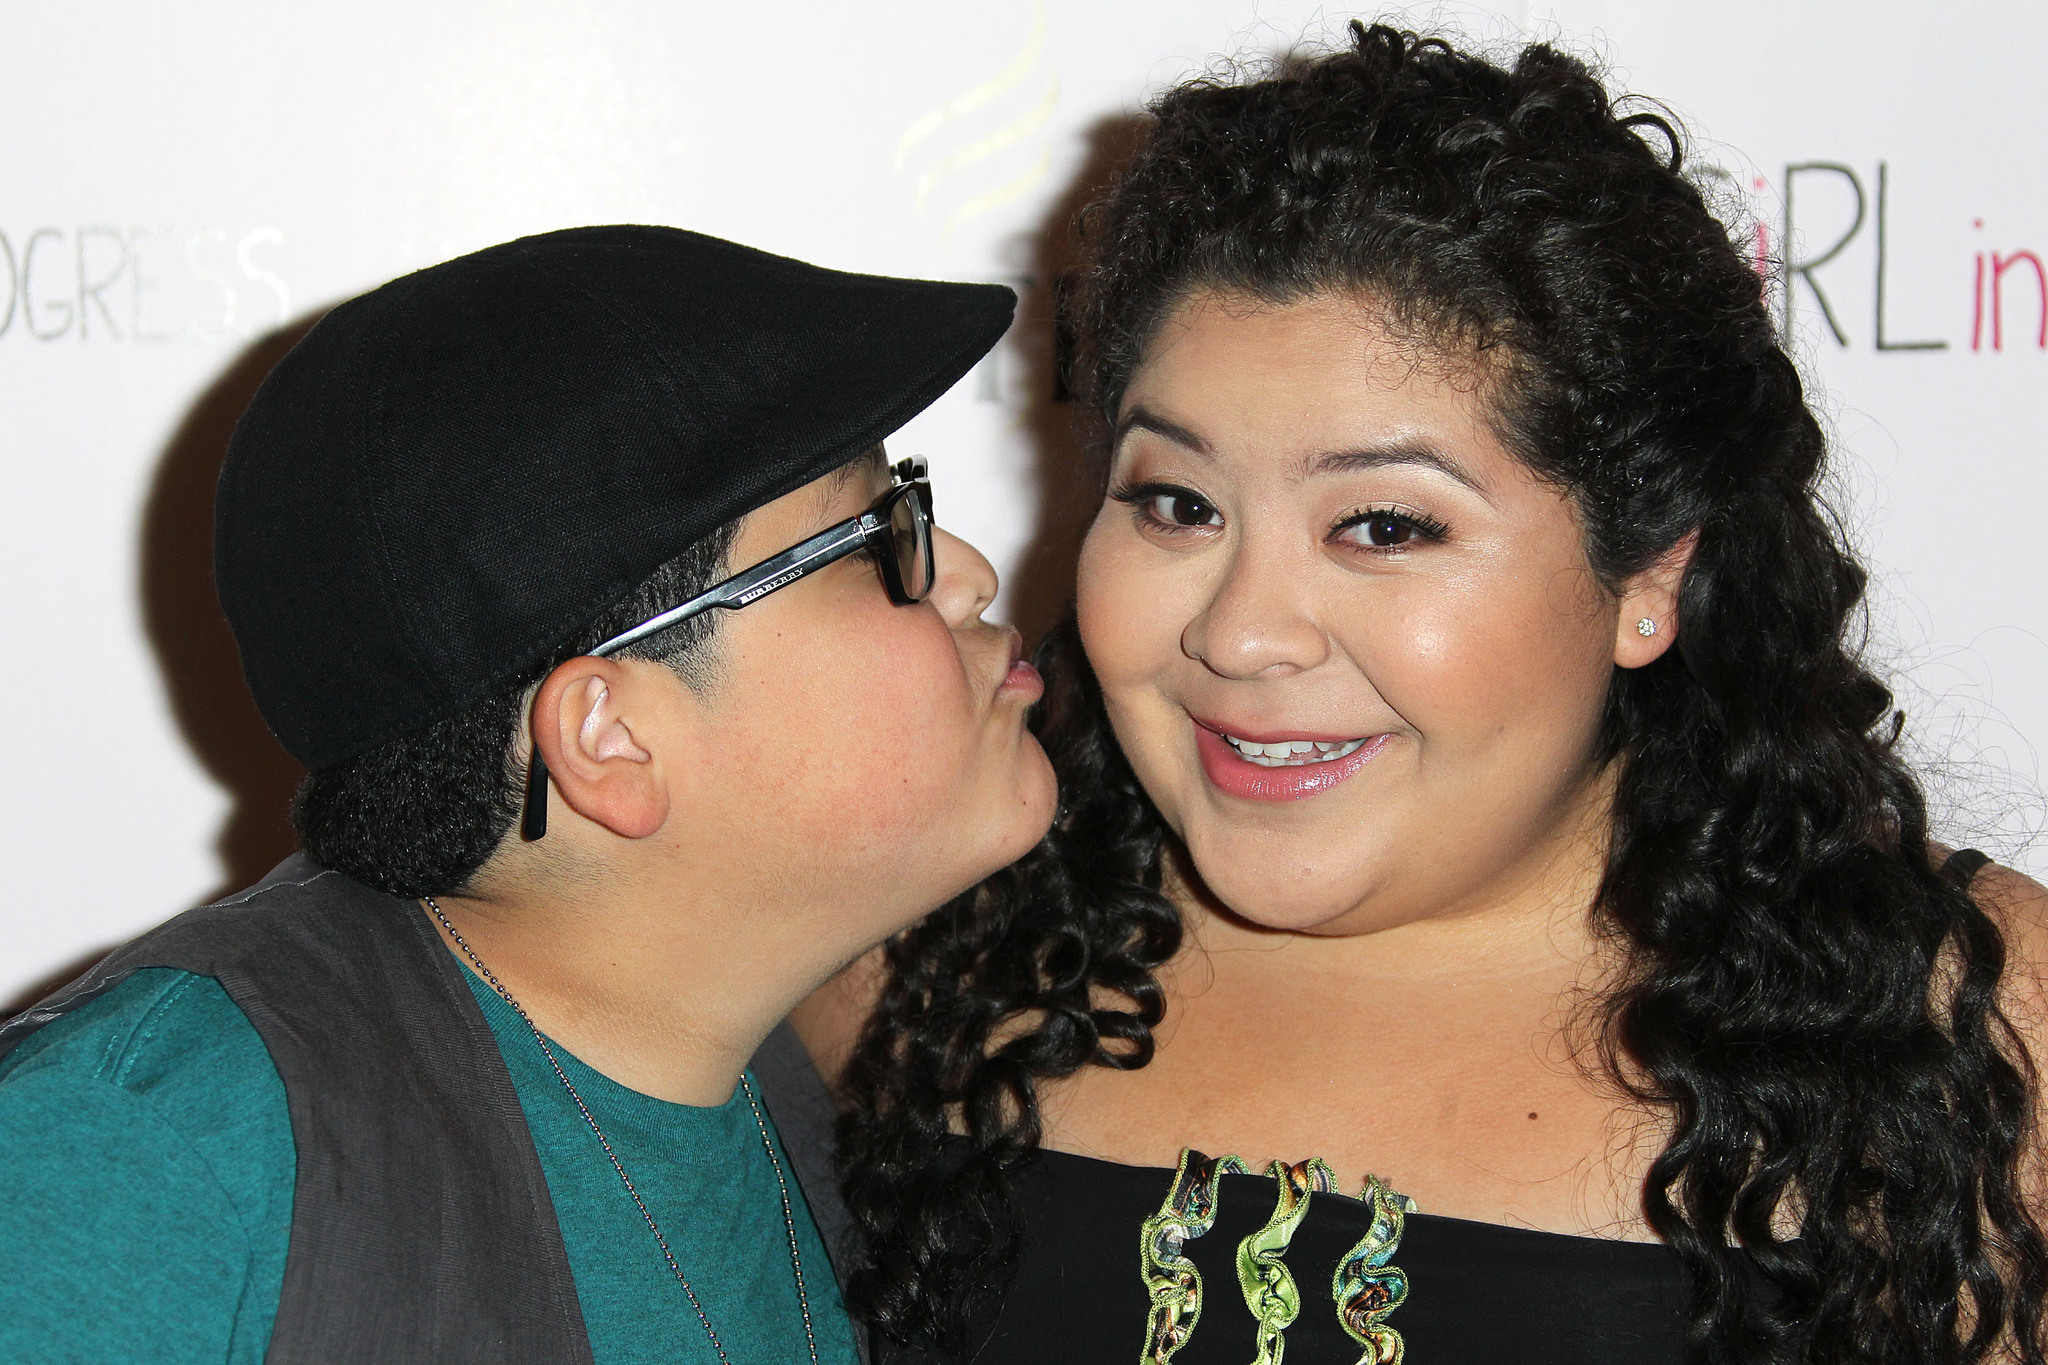 Raini Rodriguez and Rico Rodriguez at event of Girl in Progress (2012)